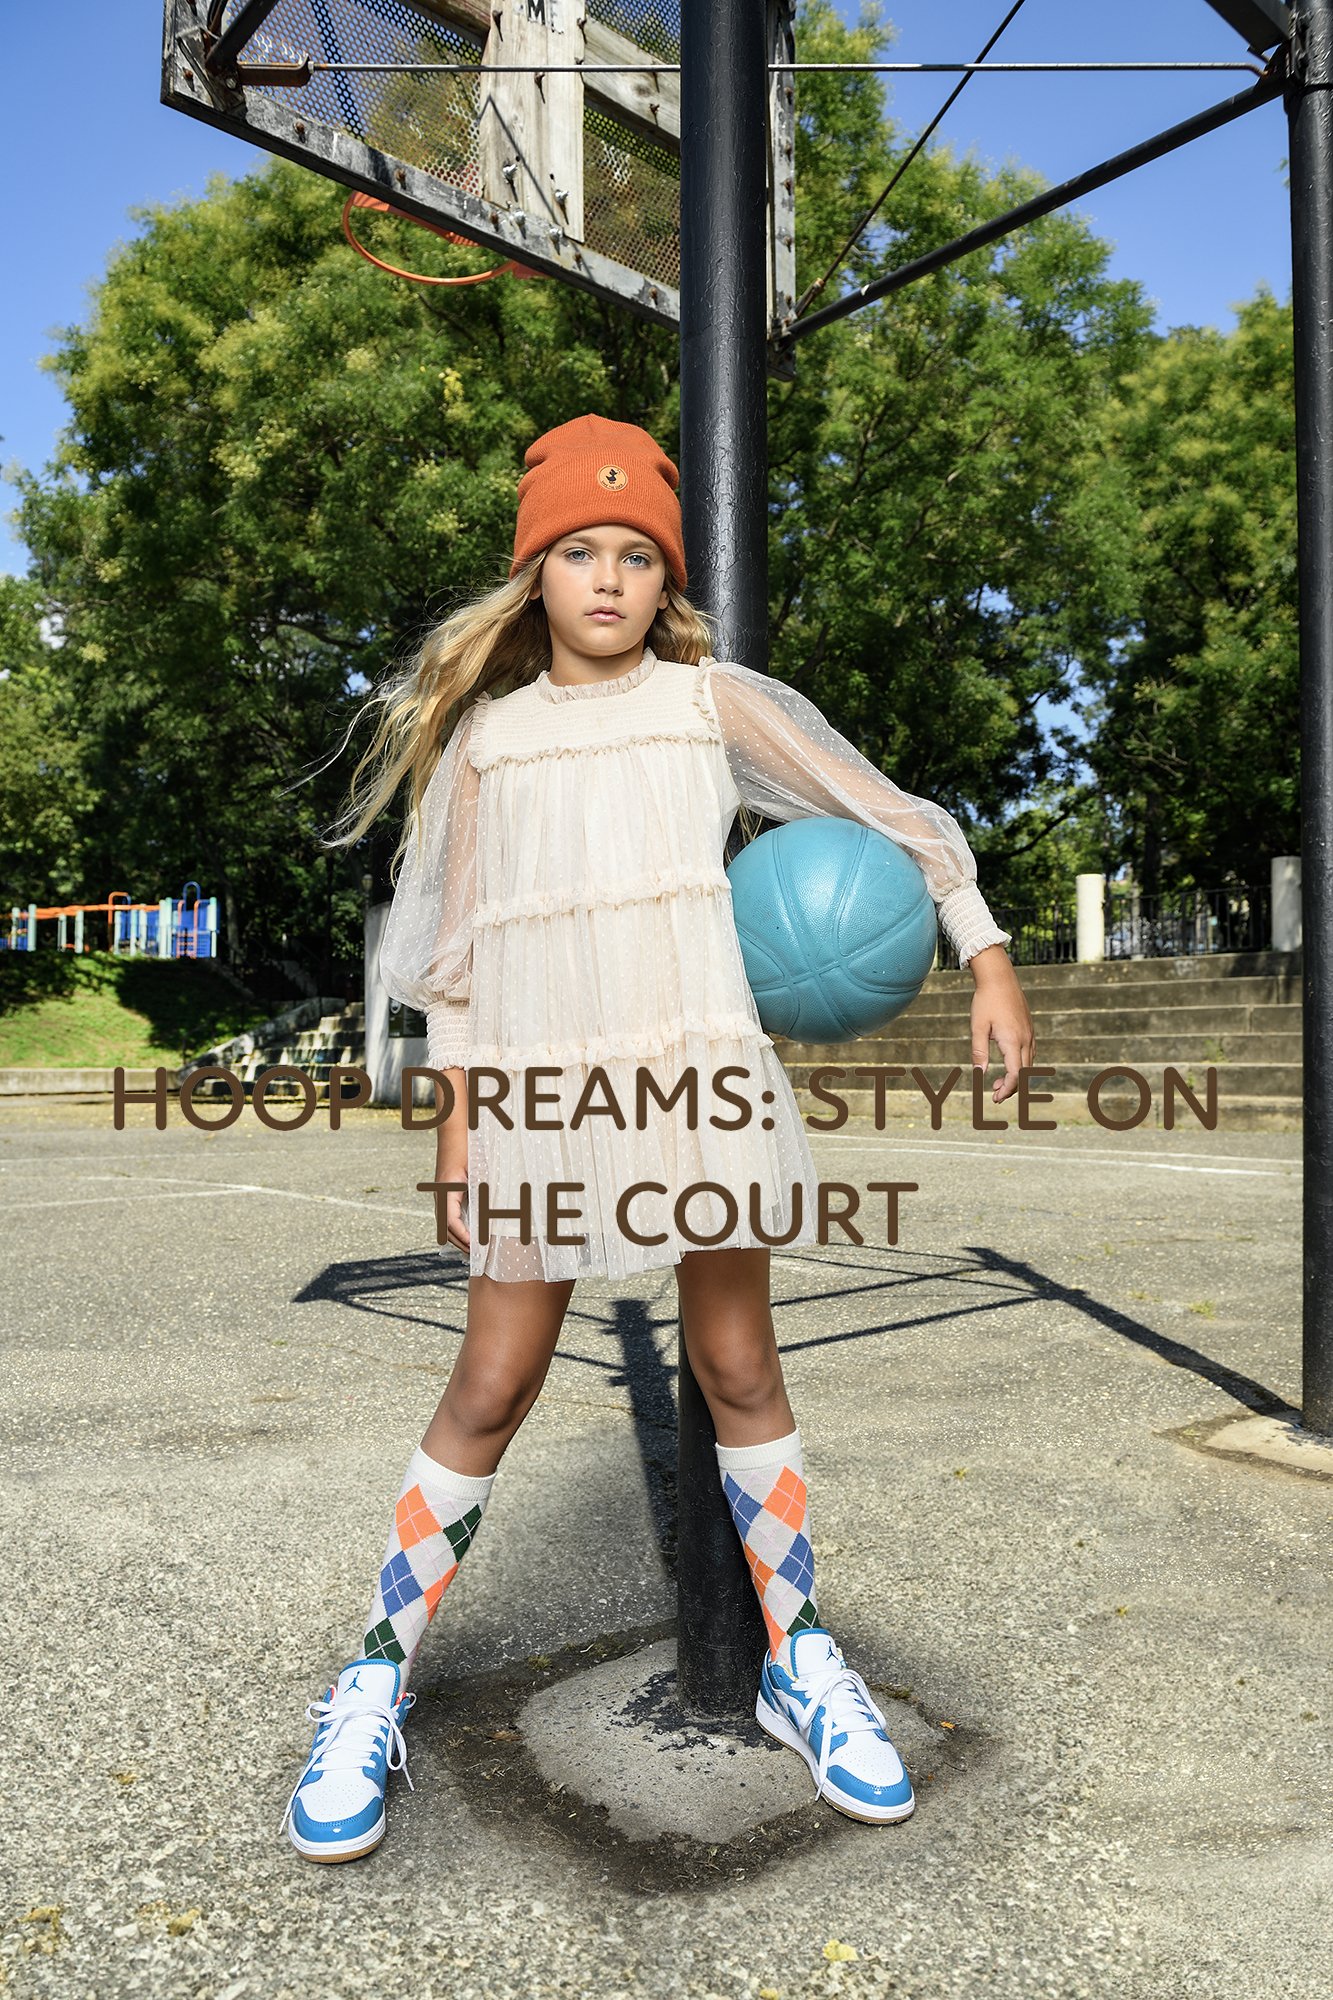 Hoop Dreams. Style On The Court.jpeg